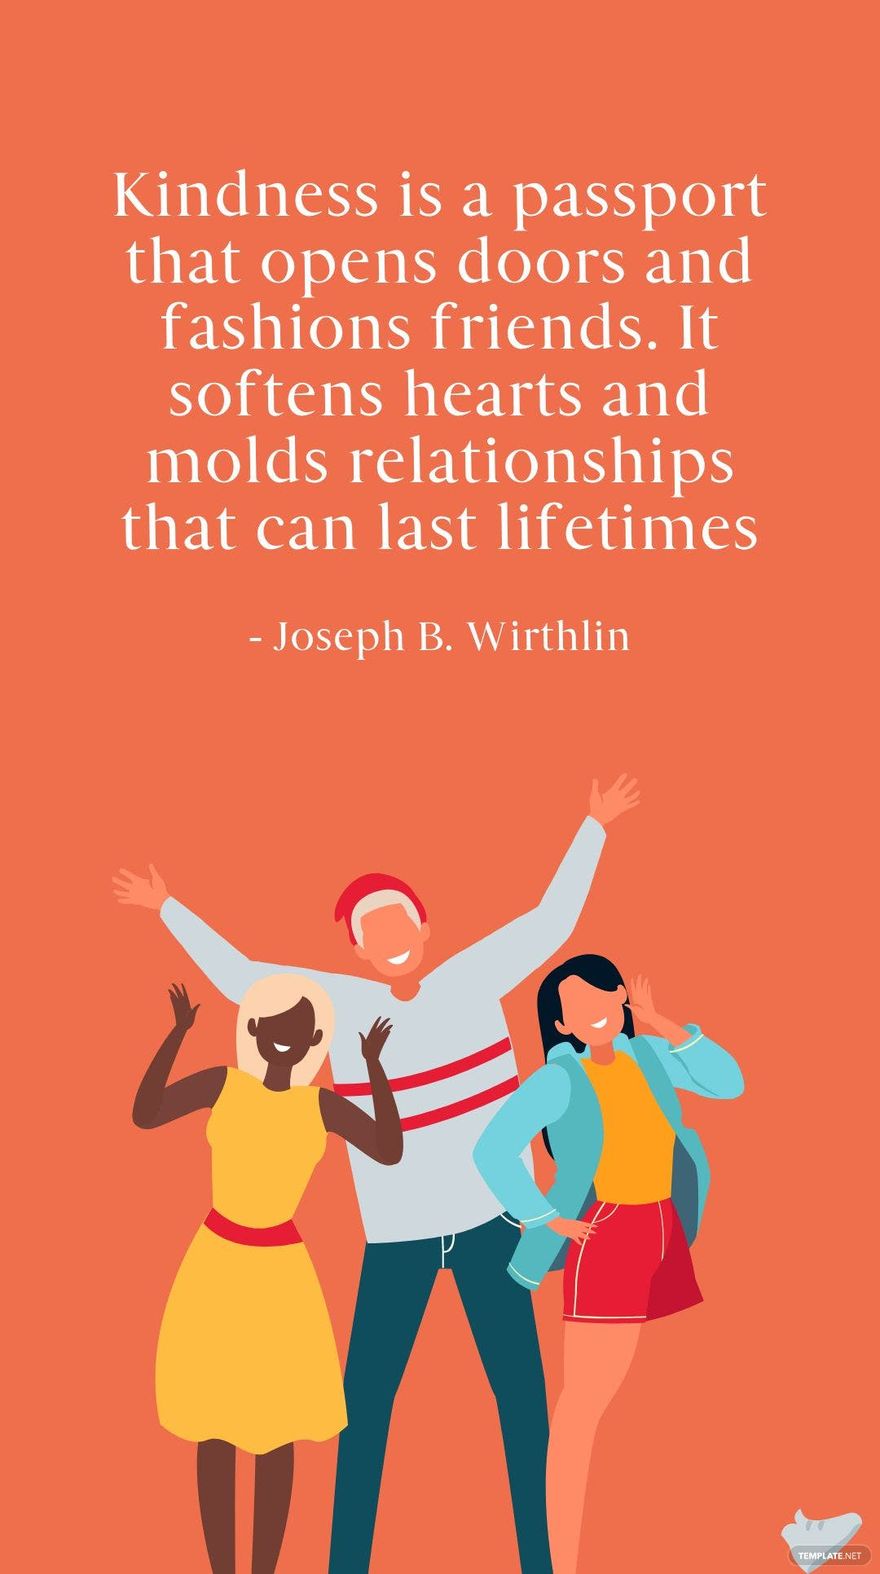 Free Joseph B. Wirthlin - Kindness is a passport that opens doors and fashions friends. It softens hearts and molds relationships that can last lifetimes in JPG